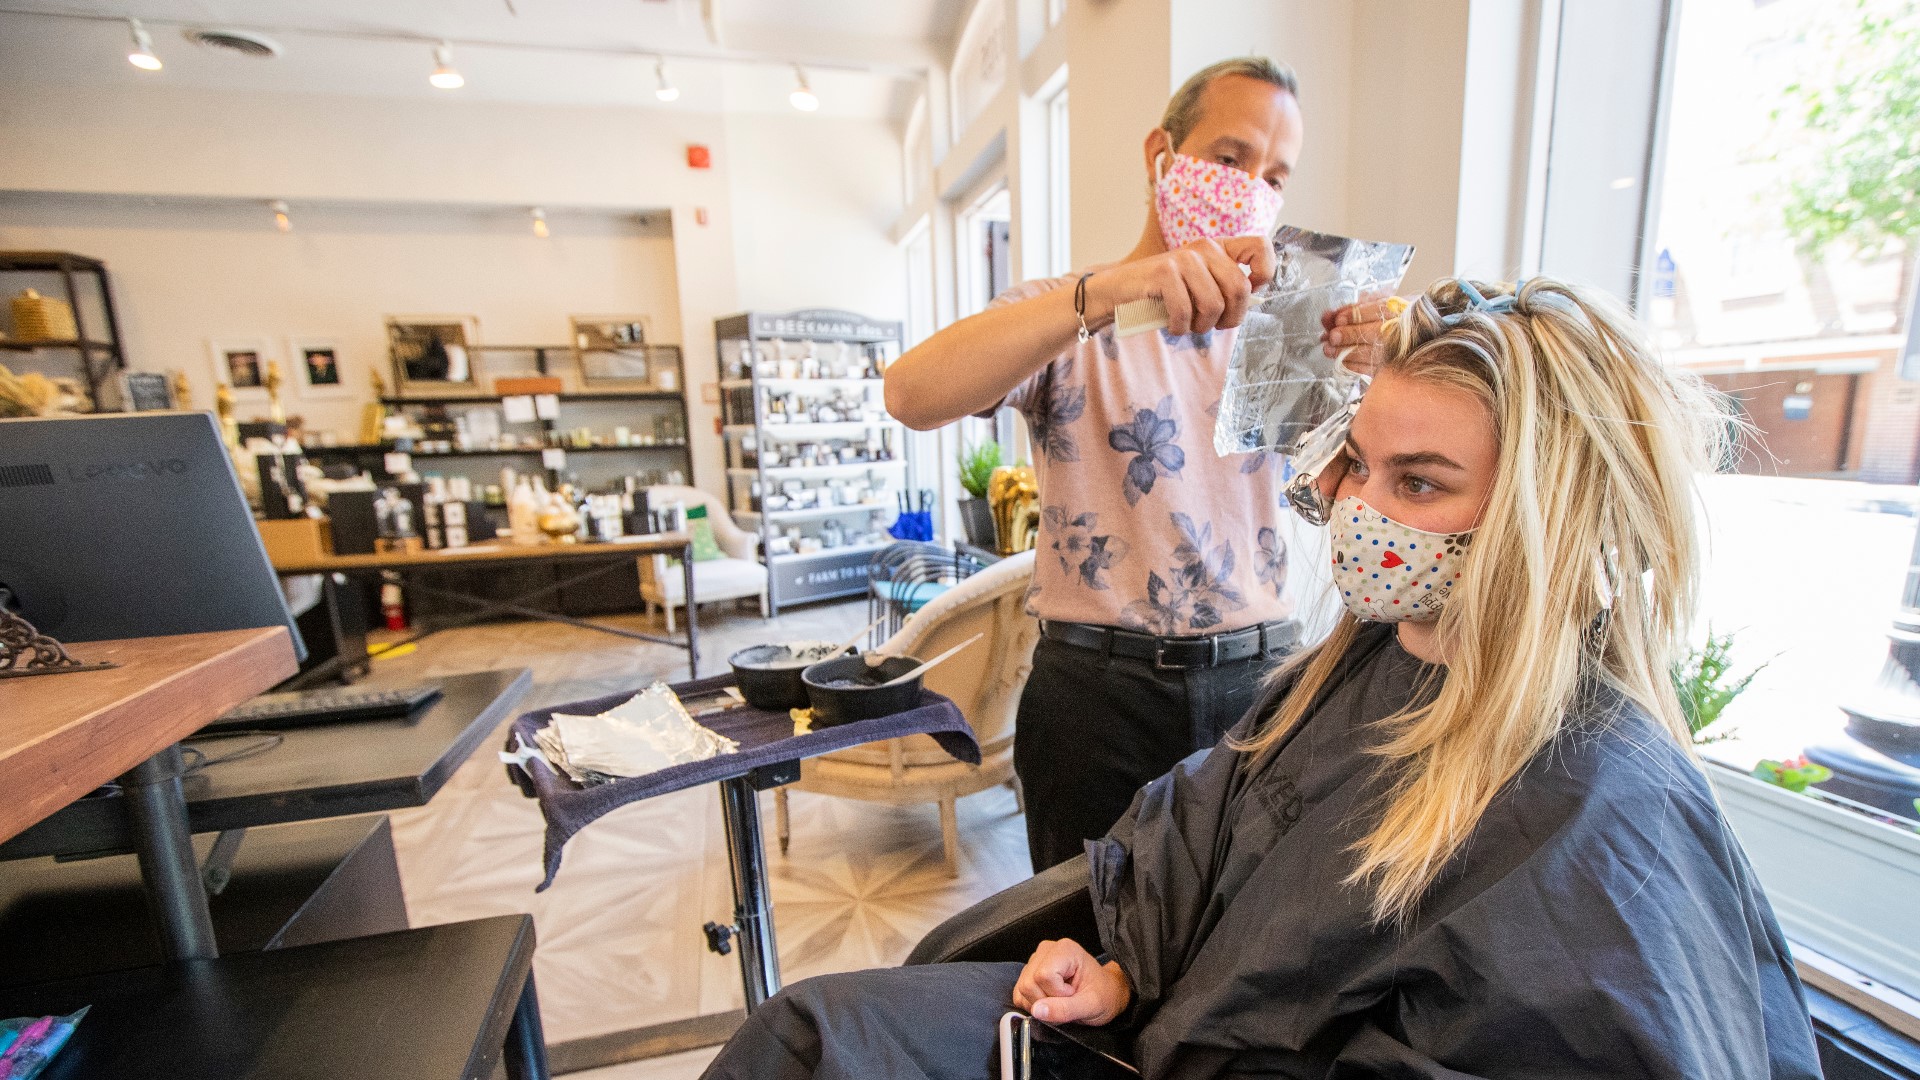 Hair salons and other personal-care businesses across the state can reopen Monday, June 15